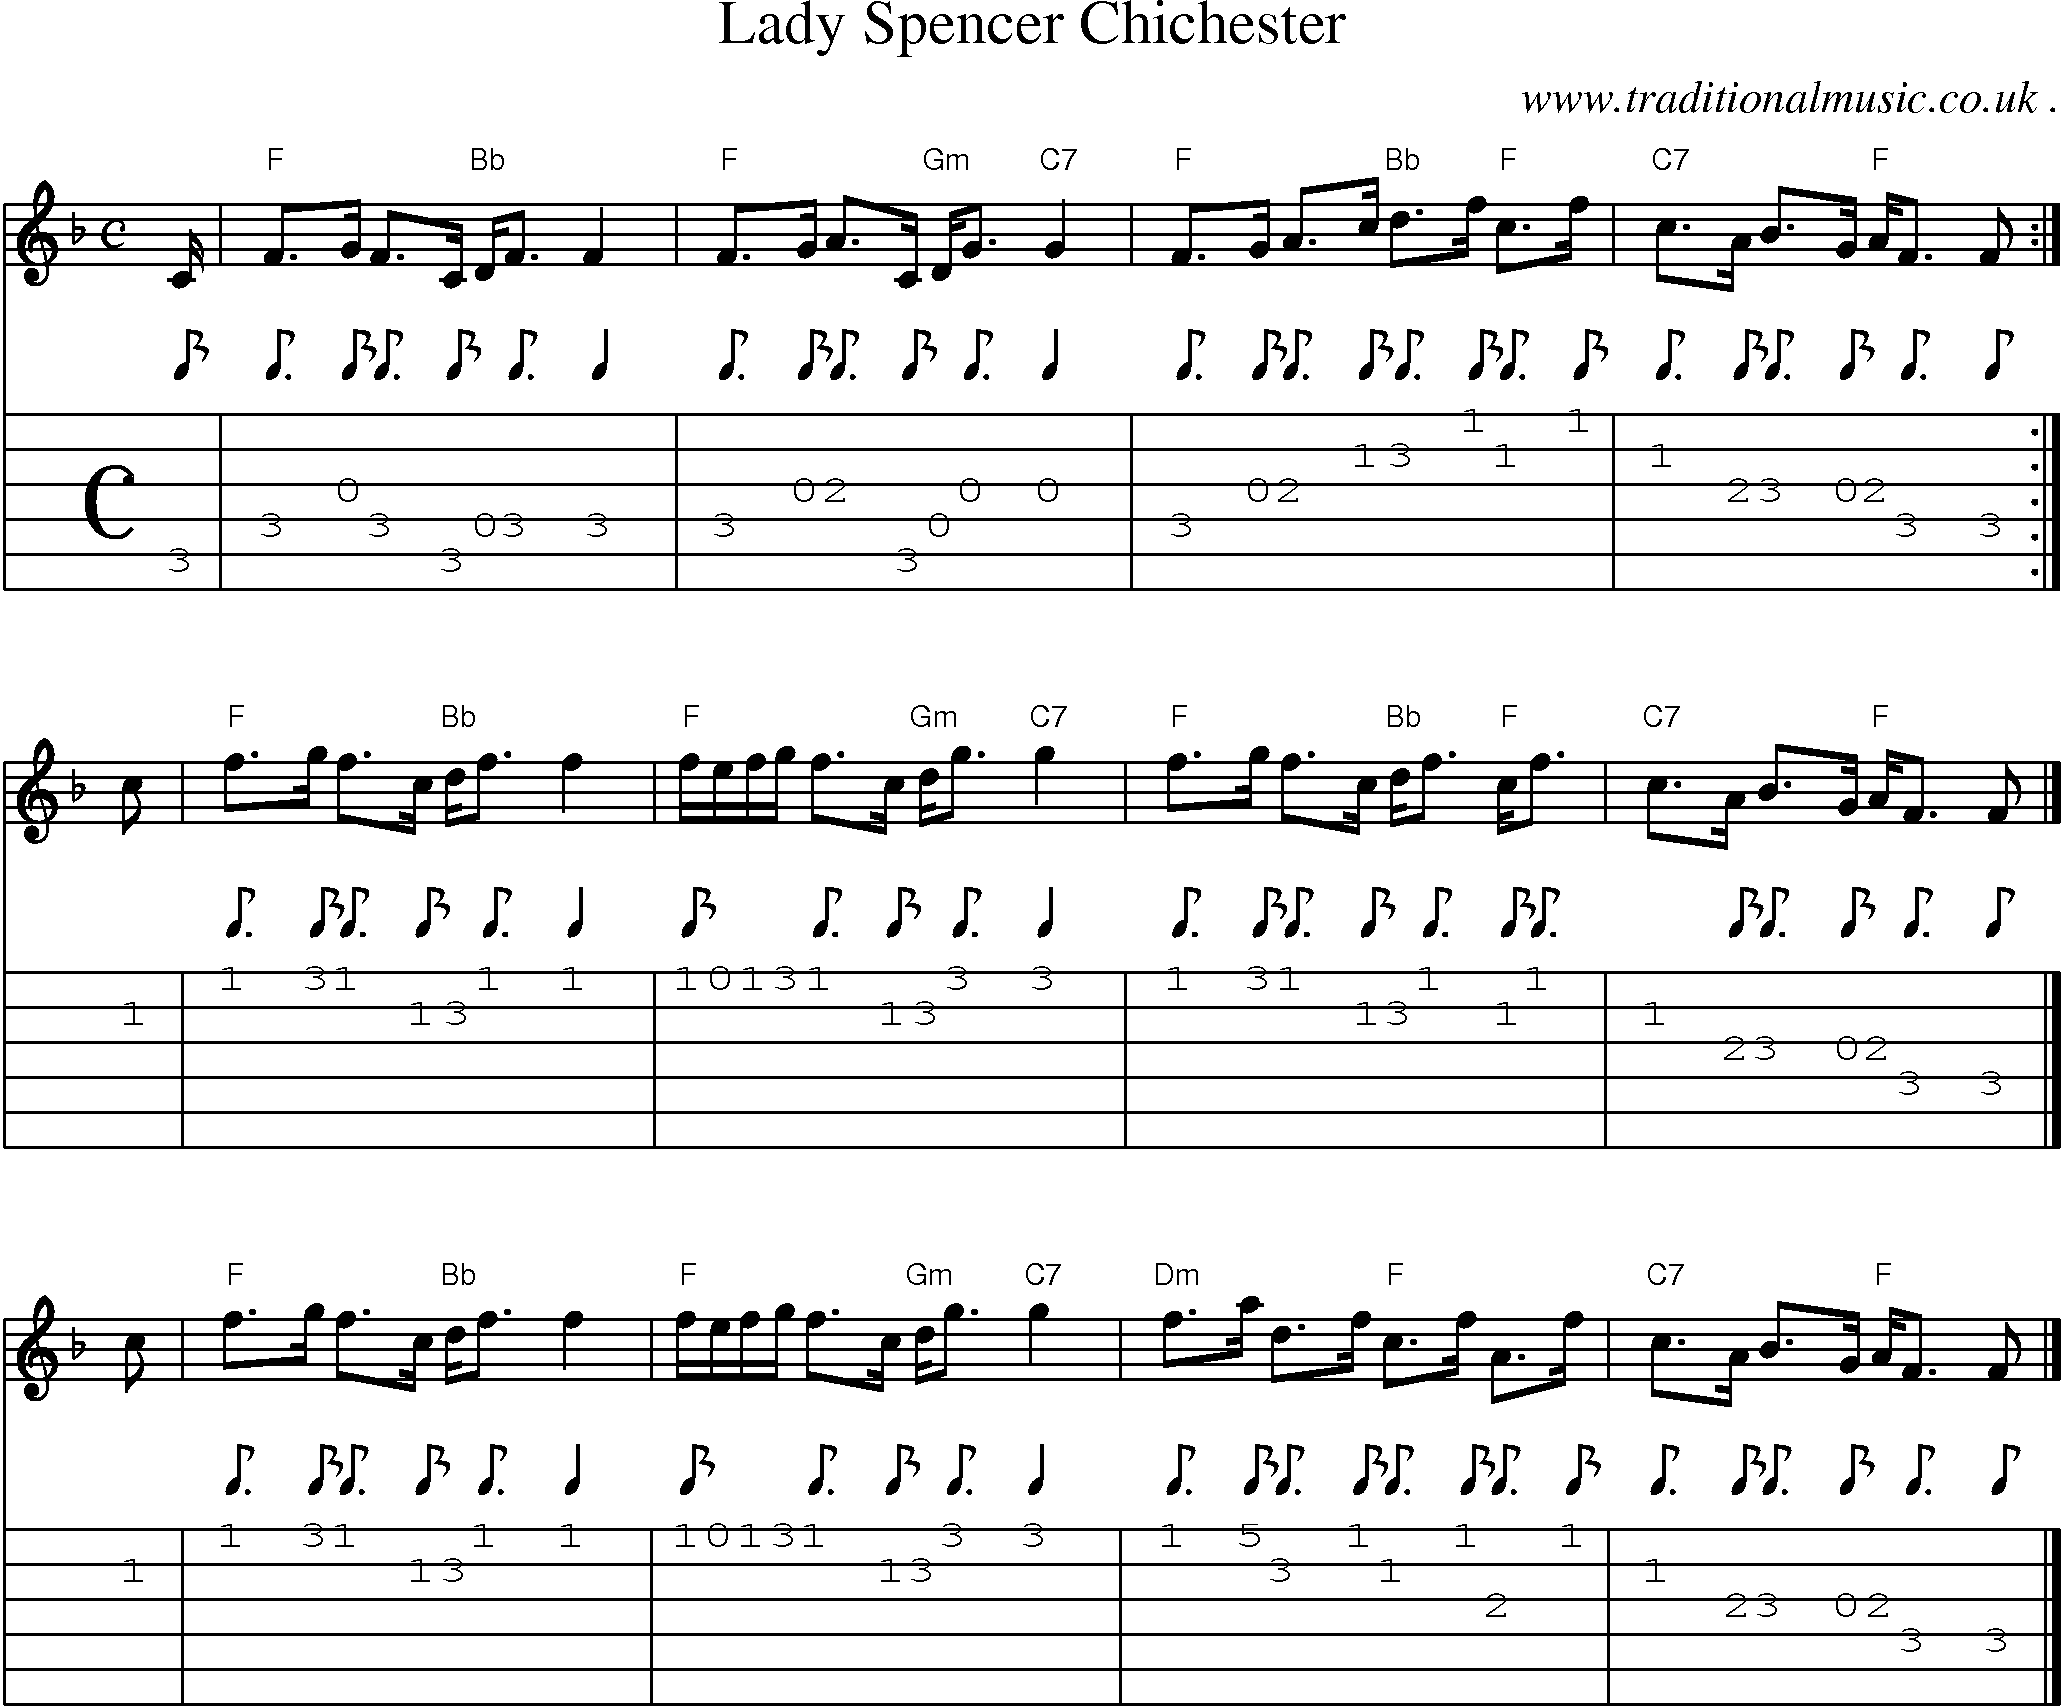 Sheet-music  score, Chords and Guitar Tabs for Lady Spencer Chichester